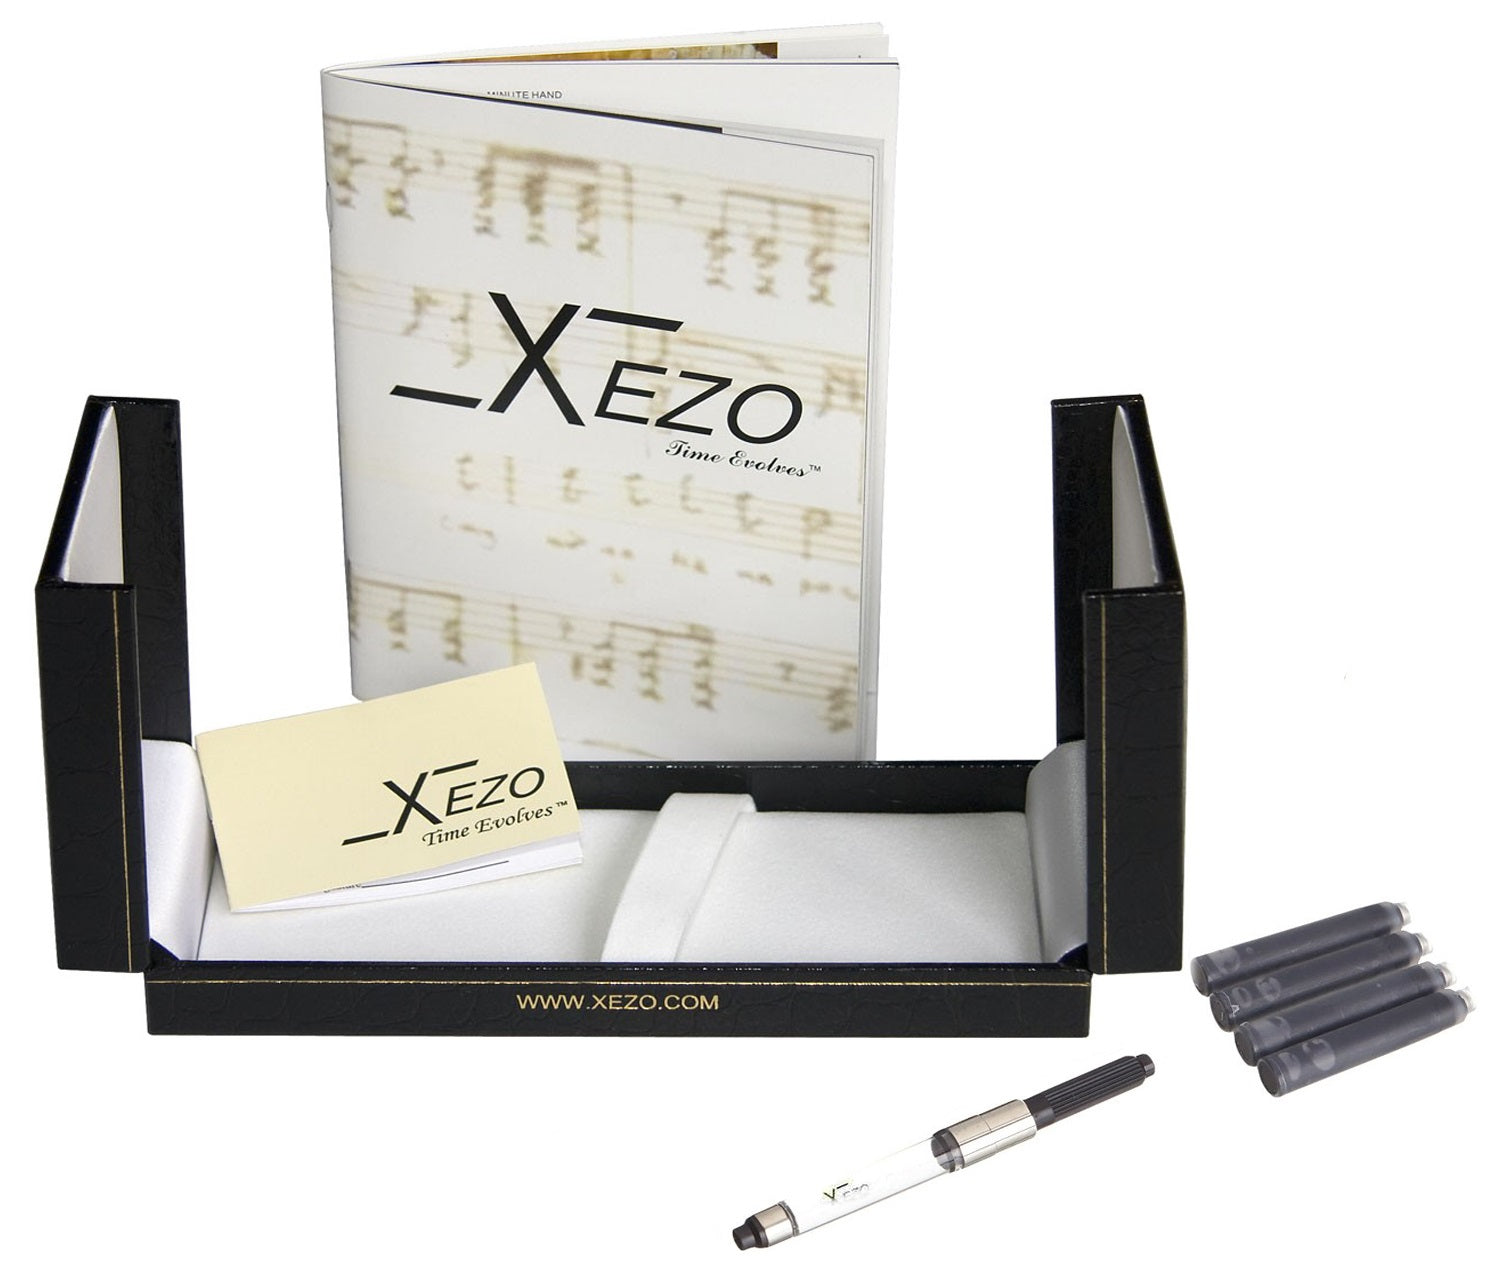 Xezo - Black gift box, certificate, manual, chrome-plated ink converter, and four ink cartridges of the Maestro Tahitian Black MOP FM fountain pen